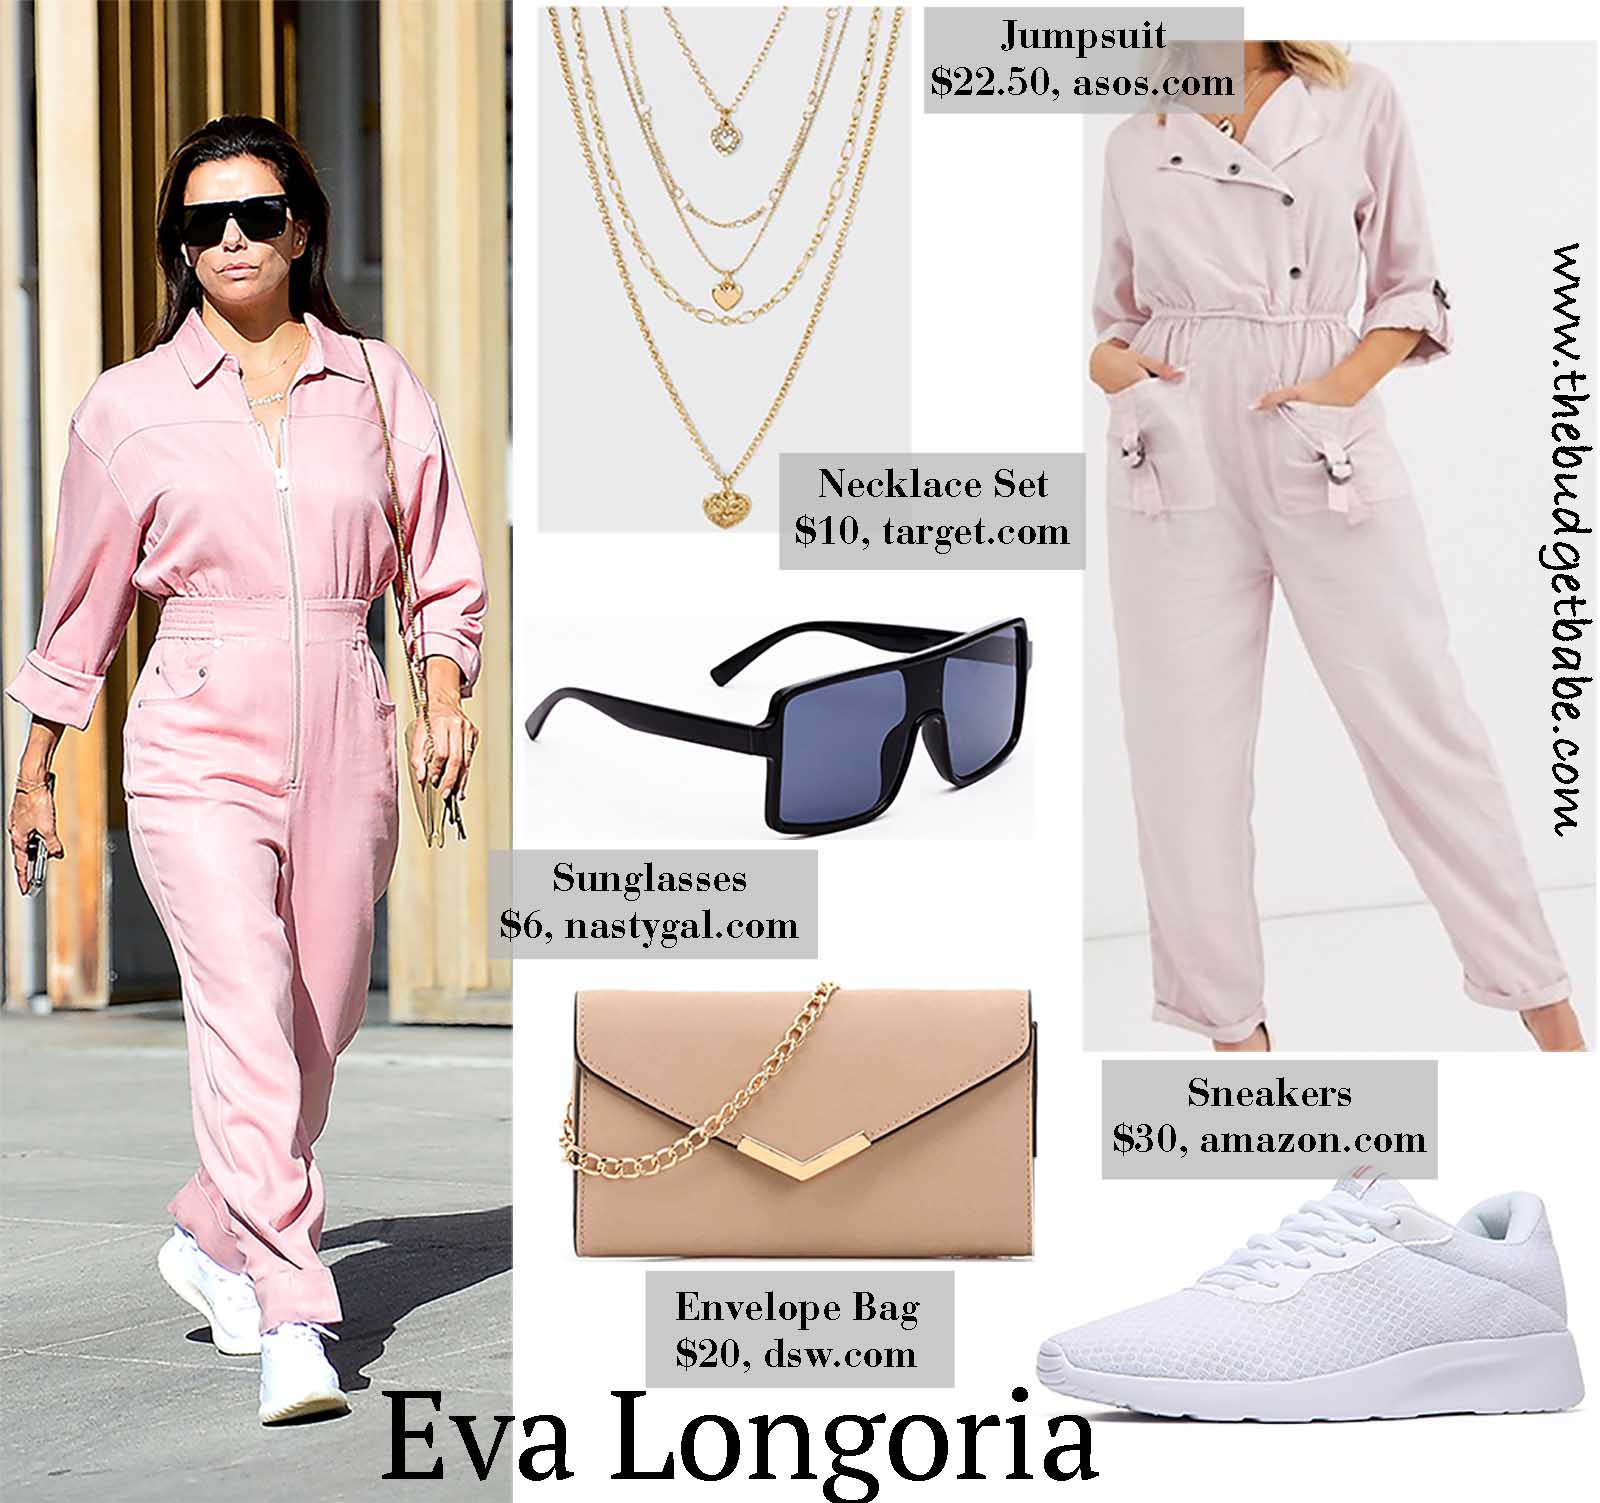 Eva is chic in pink!